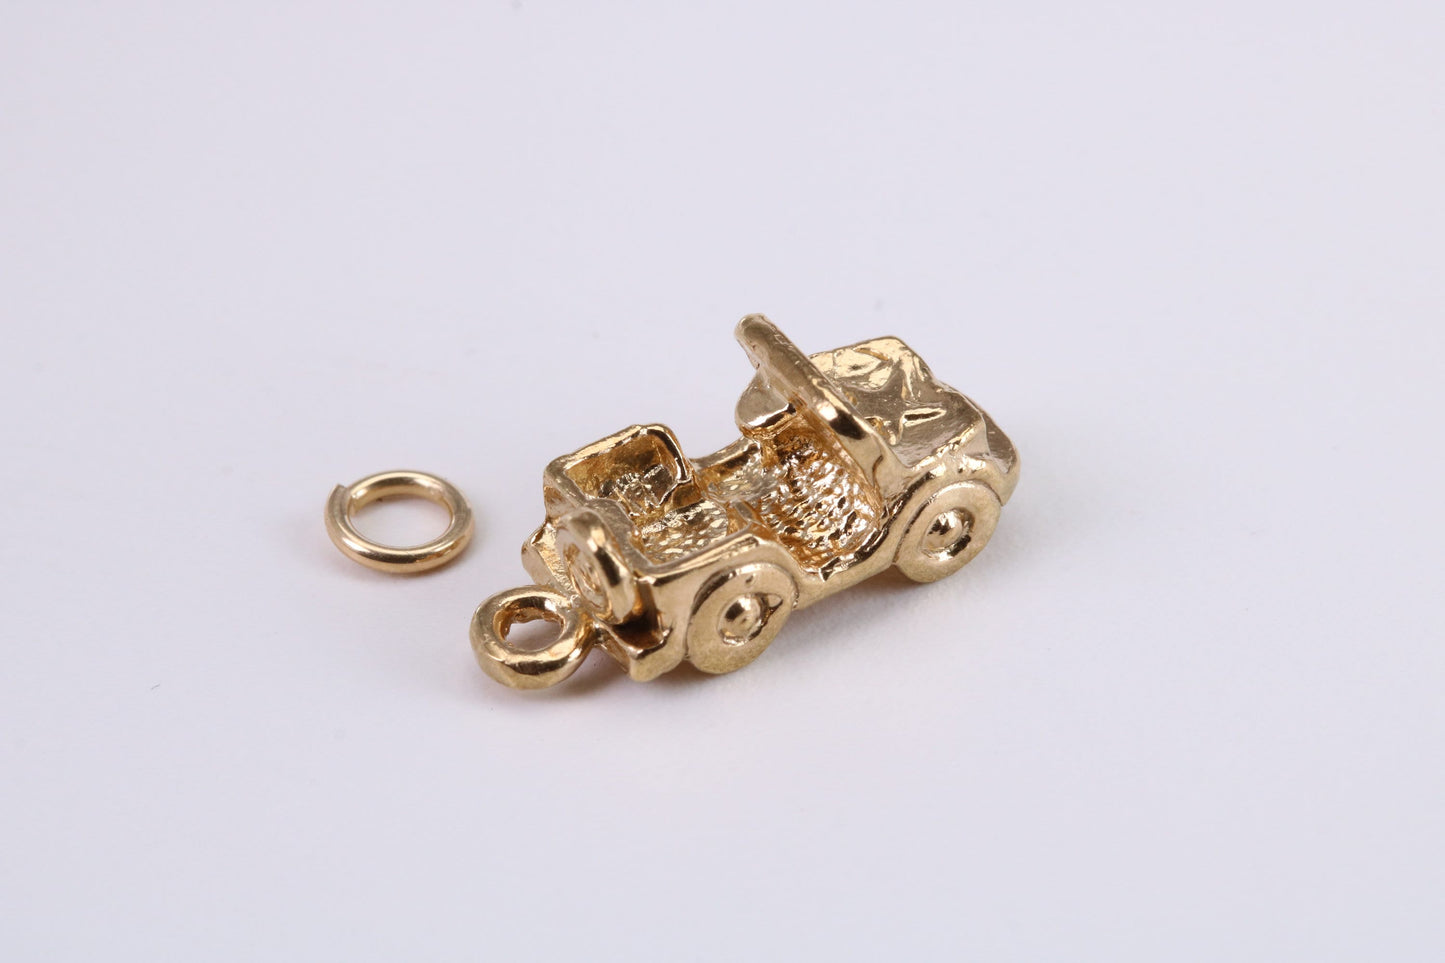 Car Charm, Traditional Charm, Made from Solid Yellow Gold, British Hallmarked, Complete with Attachment Link